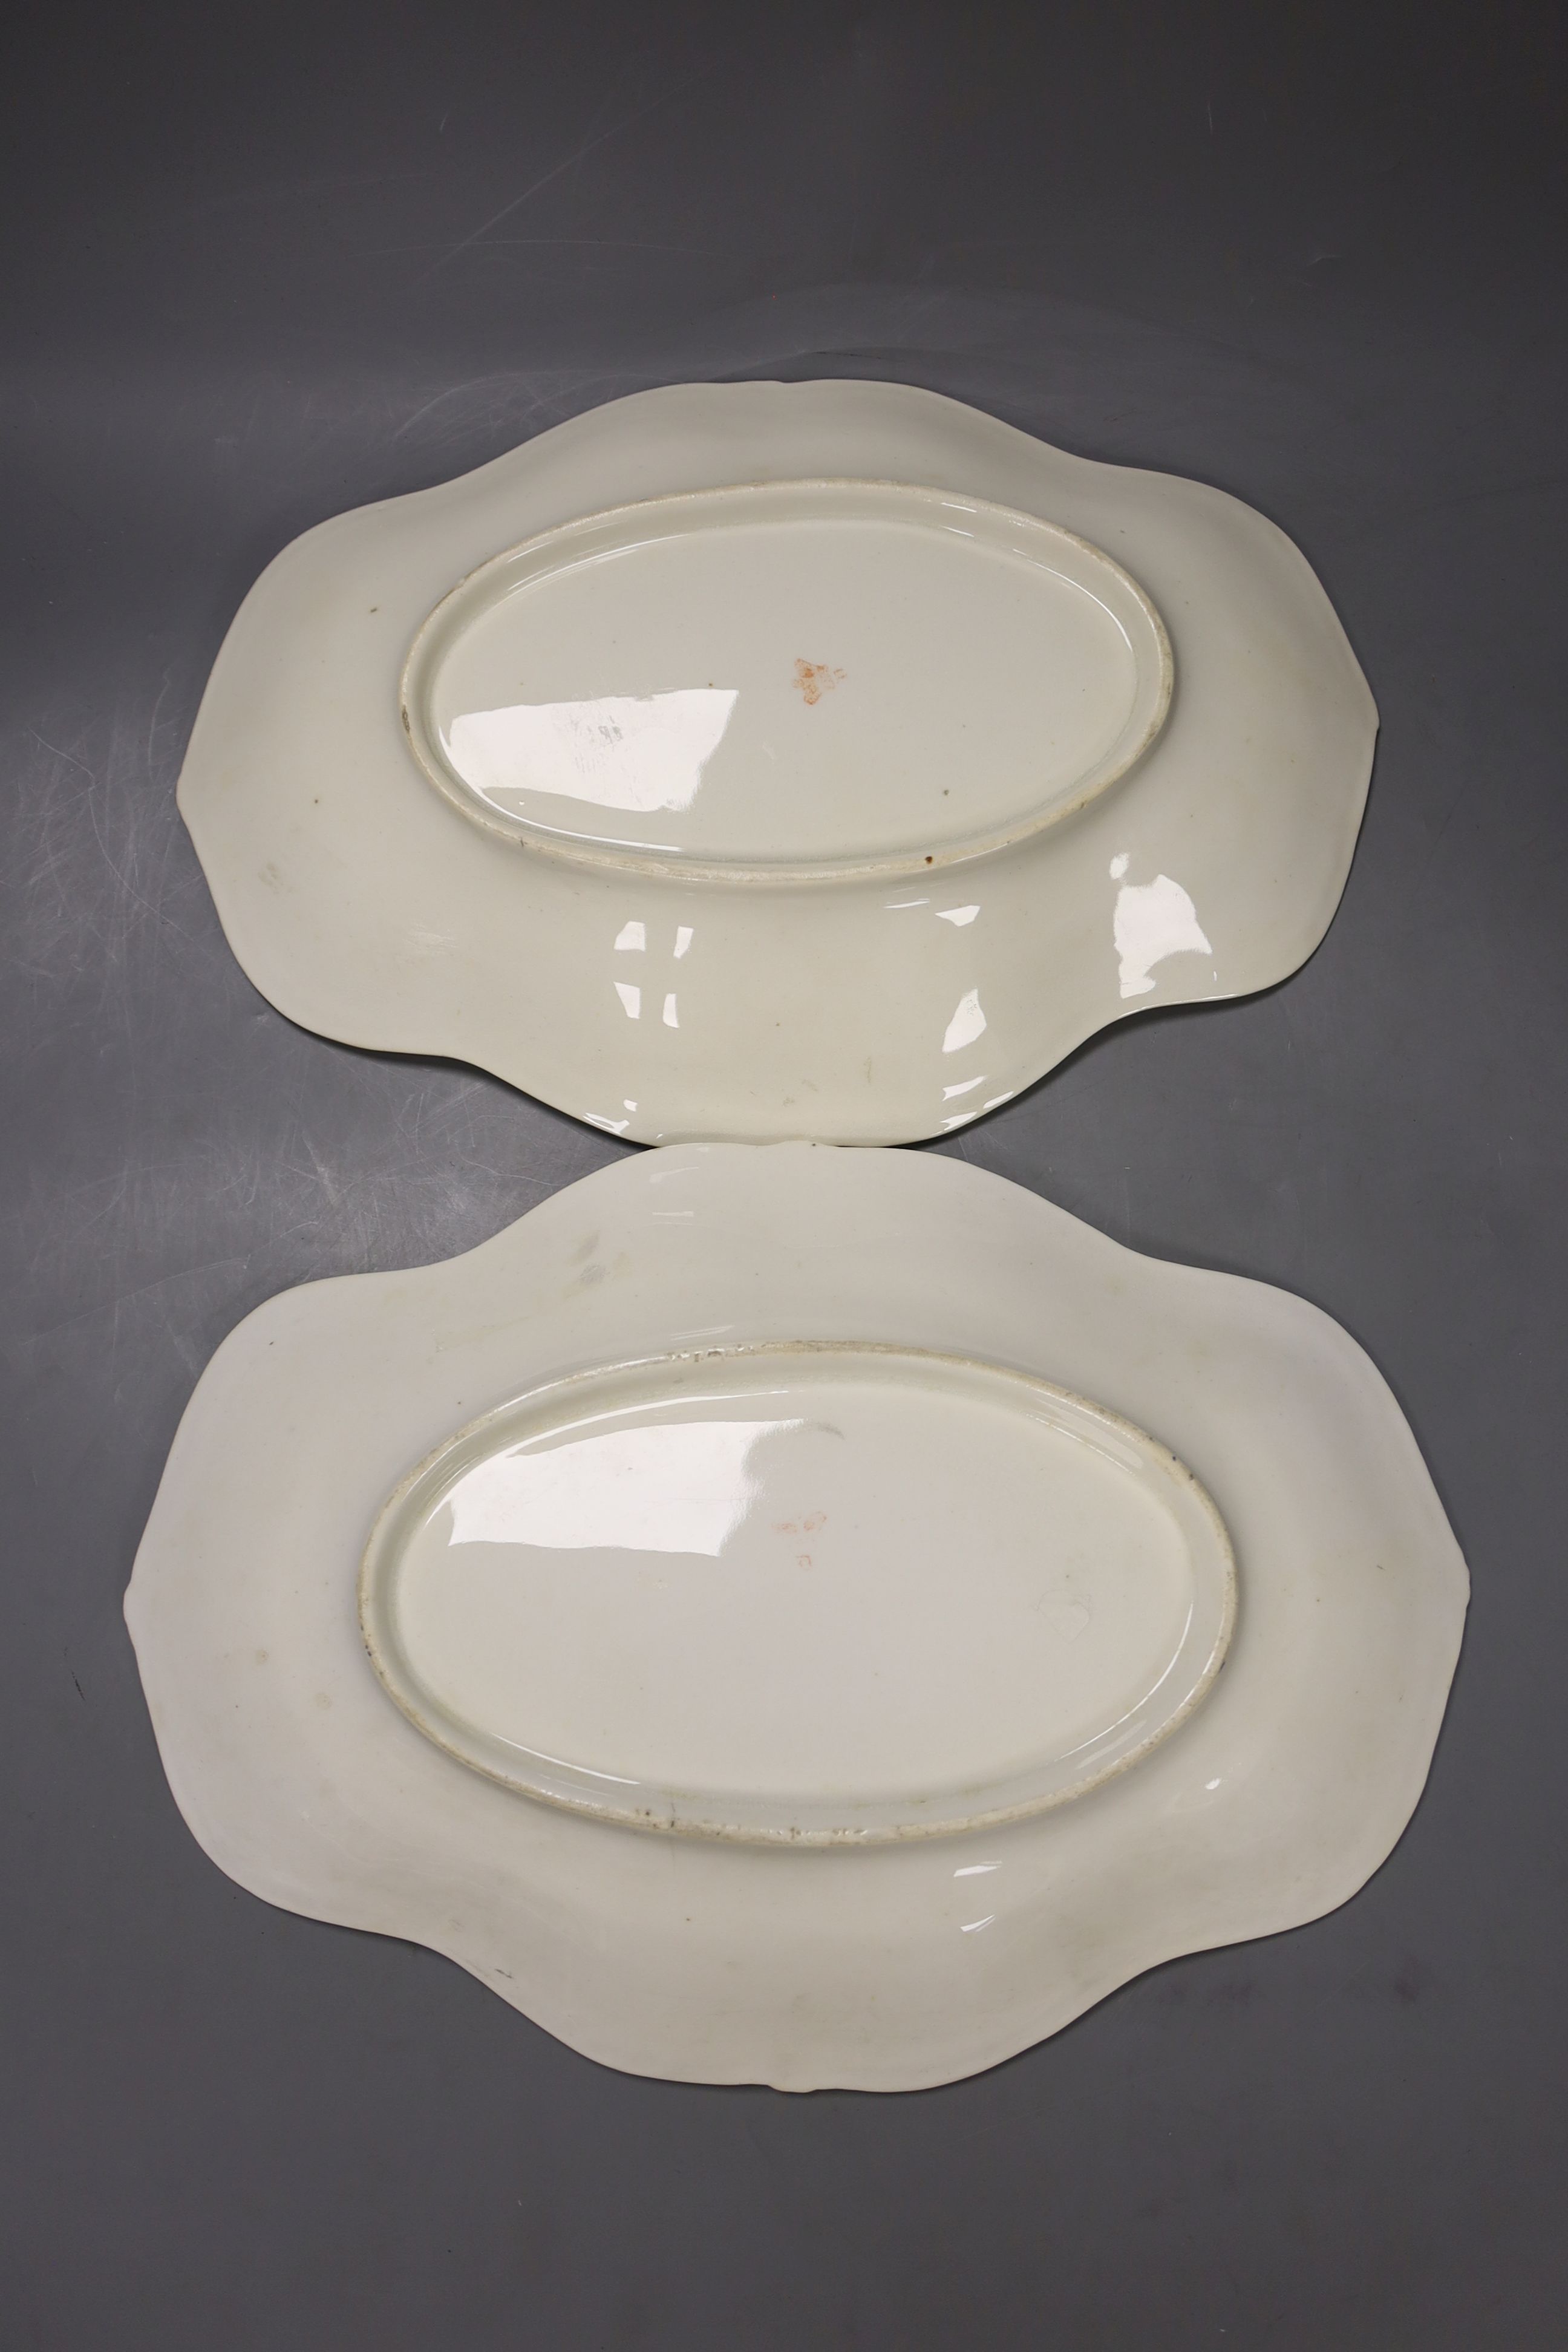 A pair of Crown Derby oval dishes, painted with four floral panels, c.1825, length 31cm